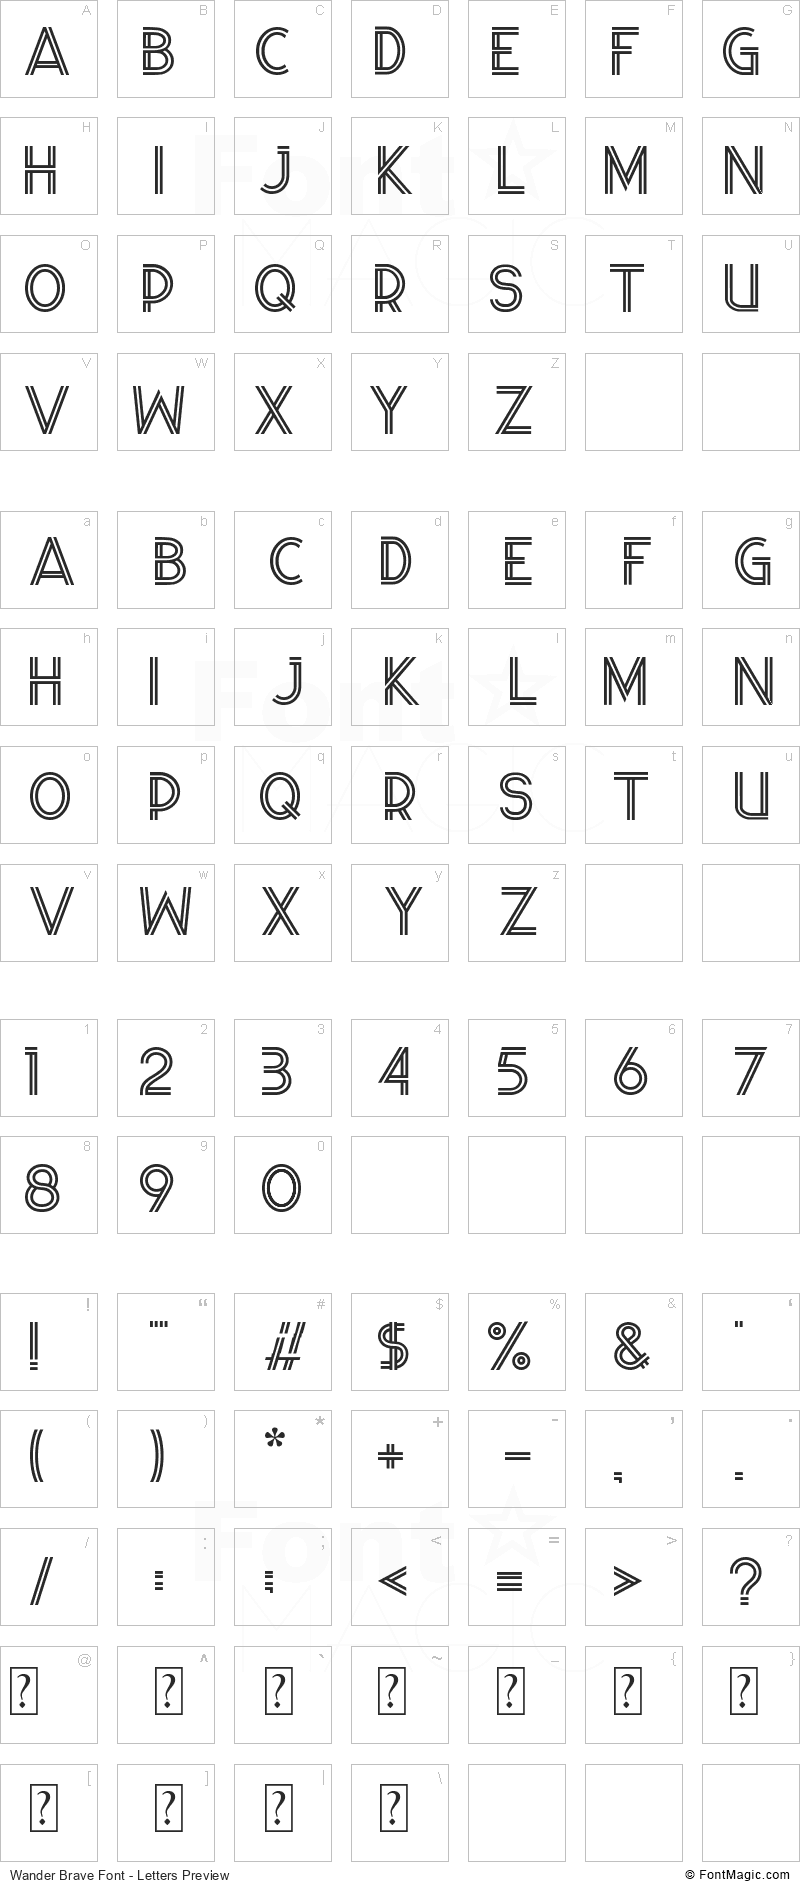 Wander Brave Font - All Latters Preview Chart